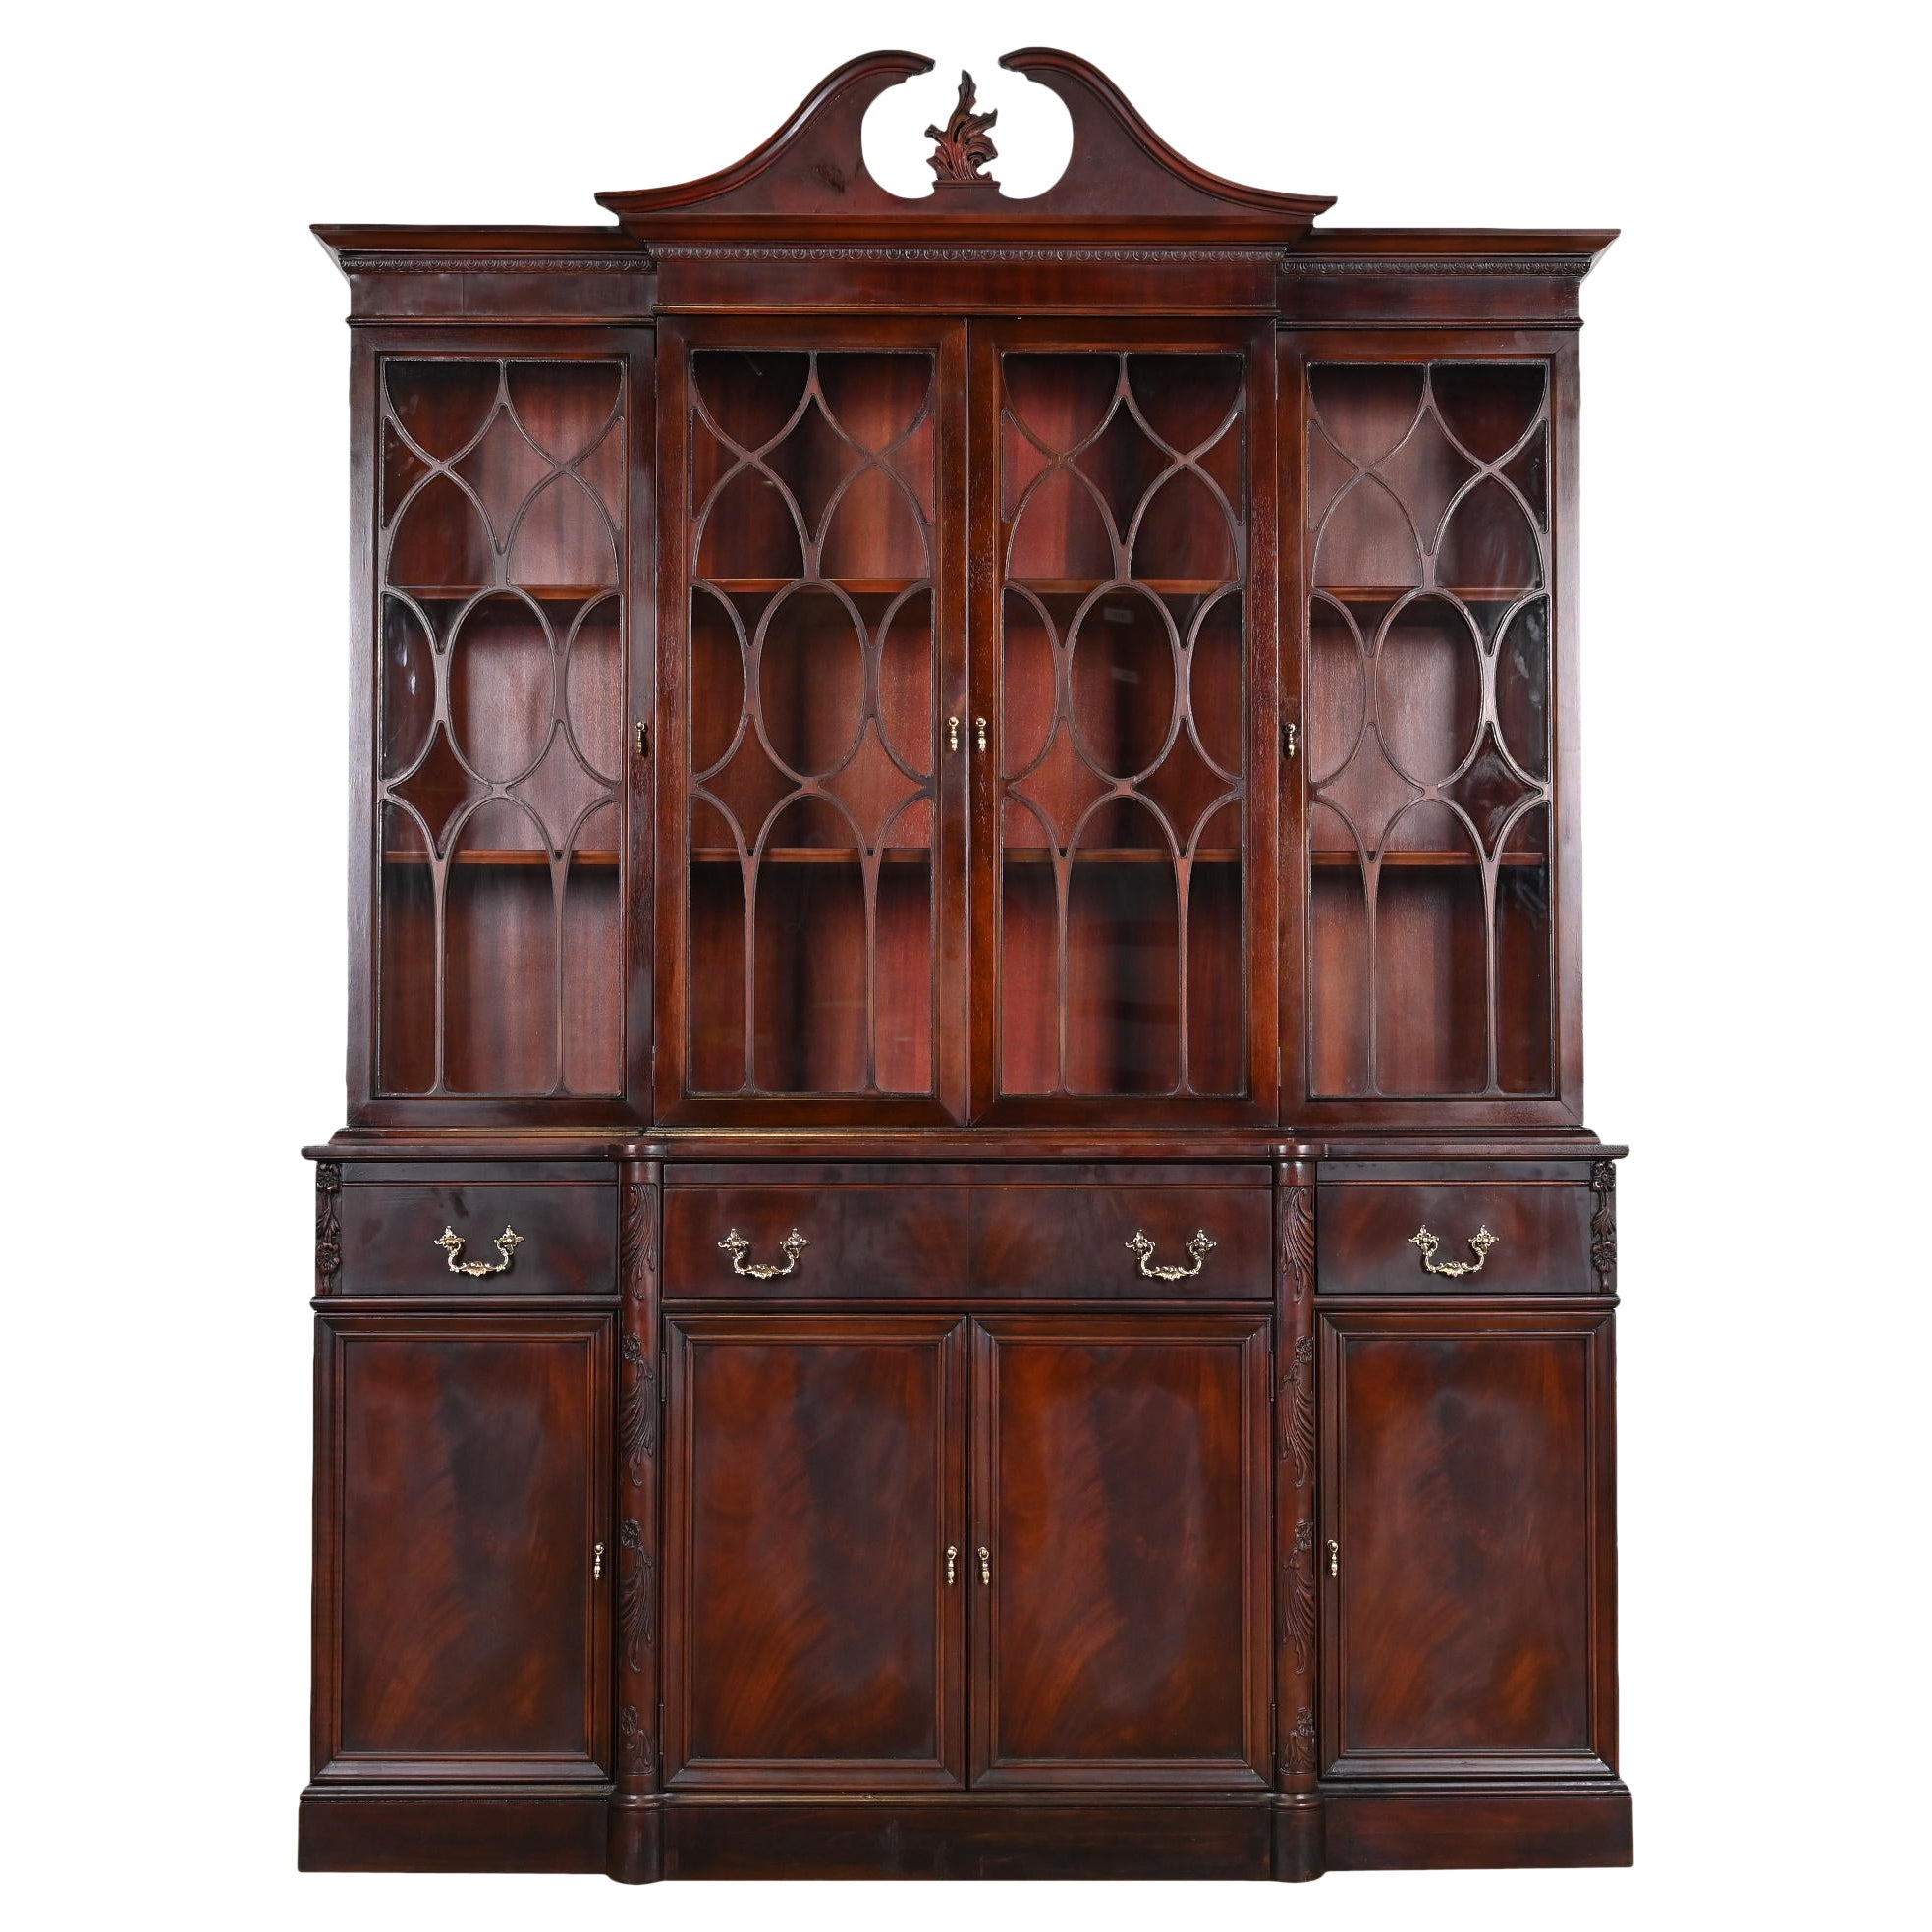 Georgian Carved Flame Mahogany Breakfront Bookcase Cabinet With Secretary Desk